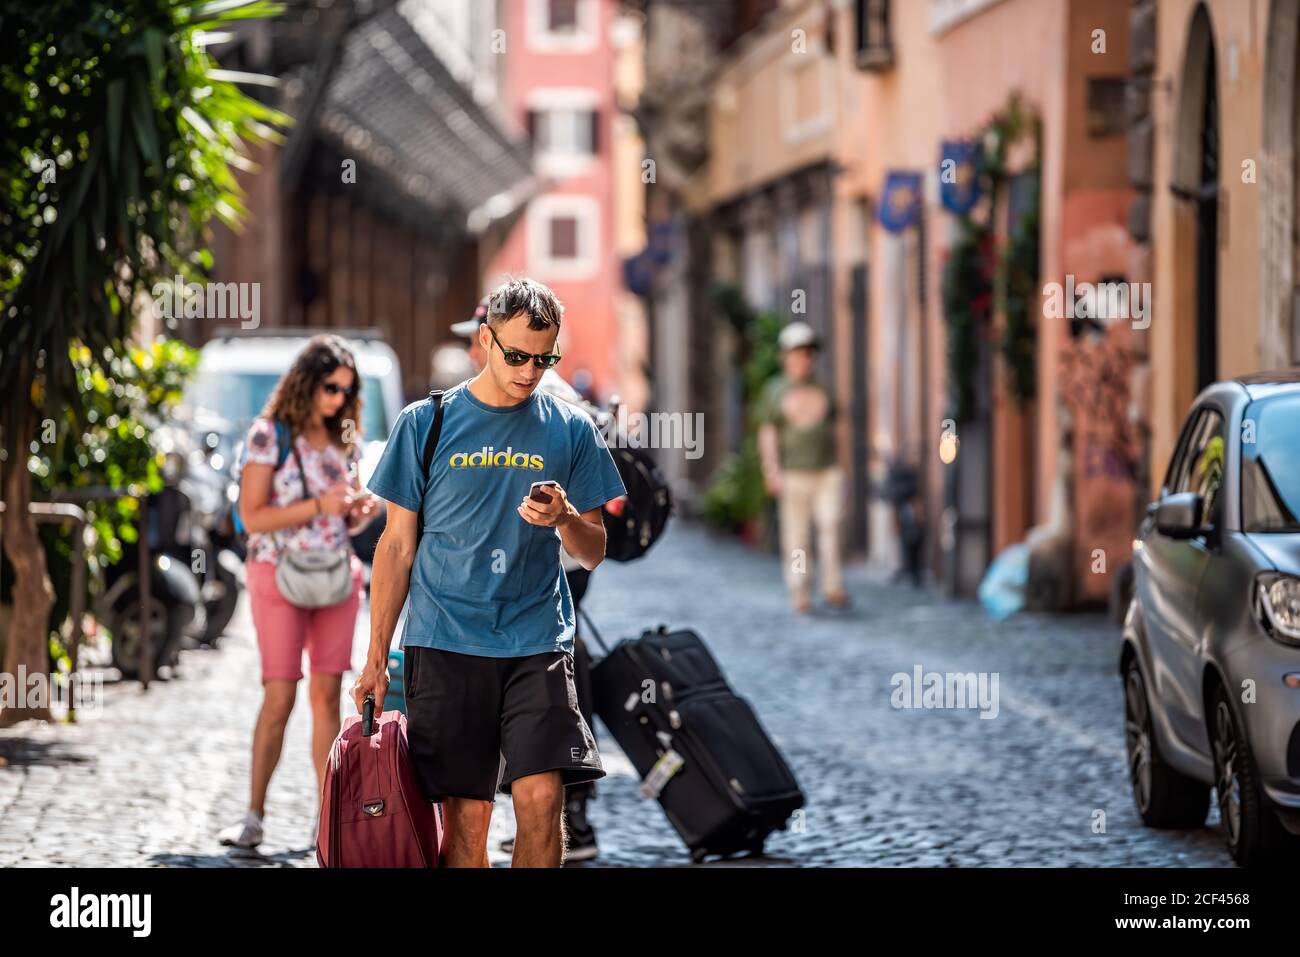 Rome, Italy - September 4, 2018: Narrow city town street with people family walking carrying luggage searching on phone for hotel Stock Photo